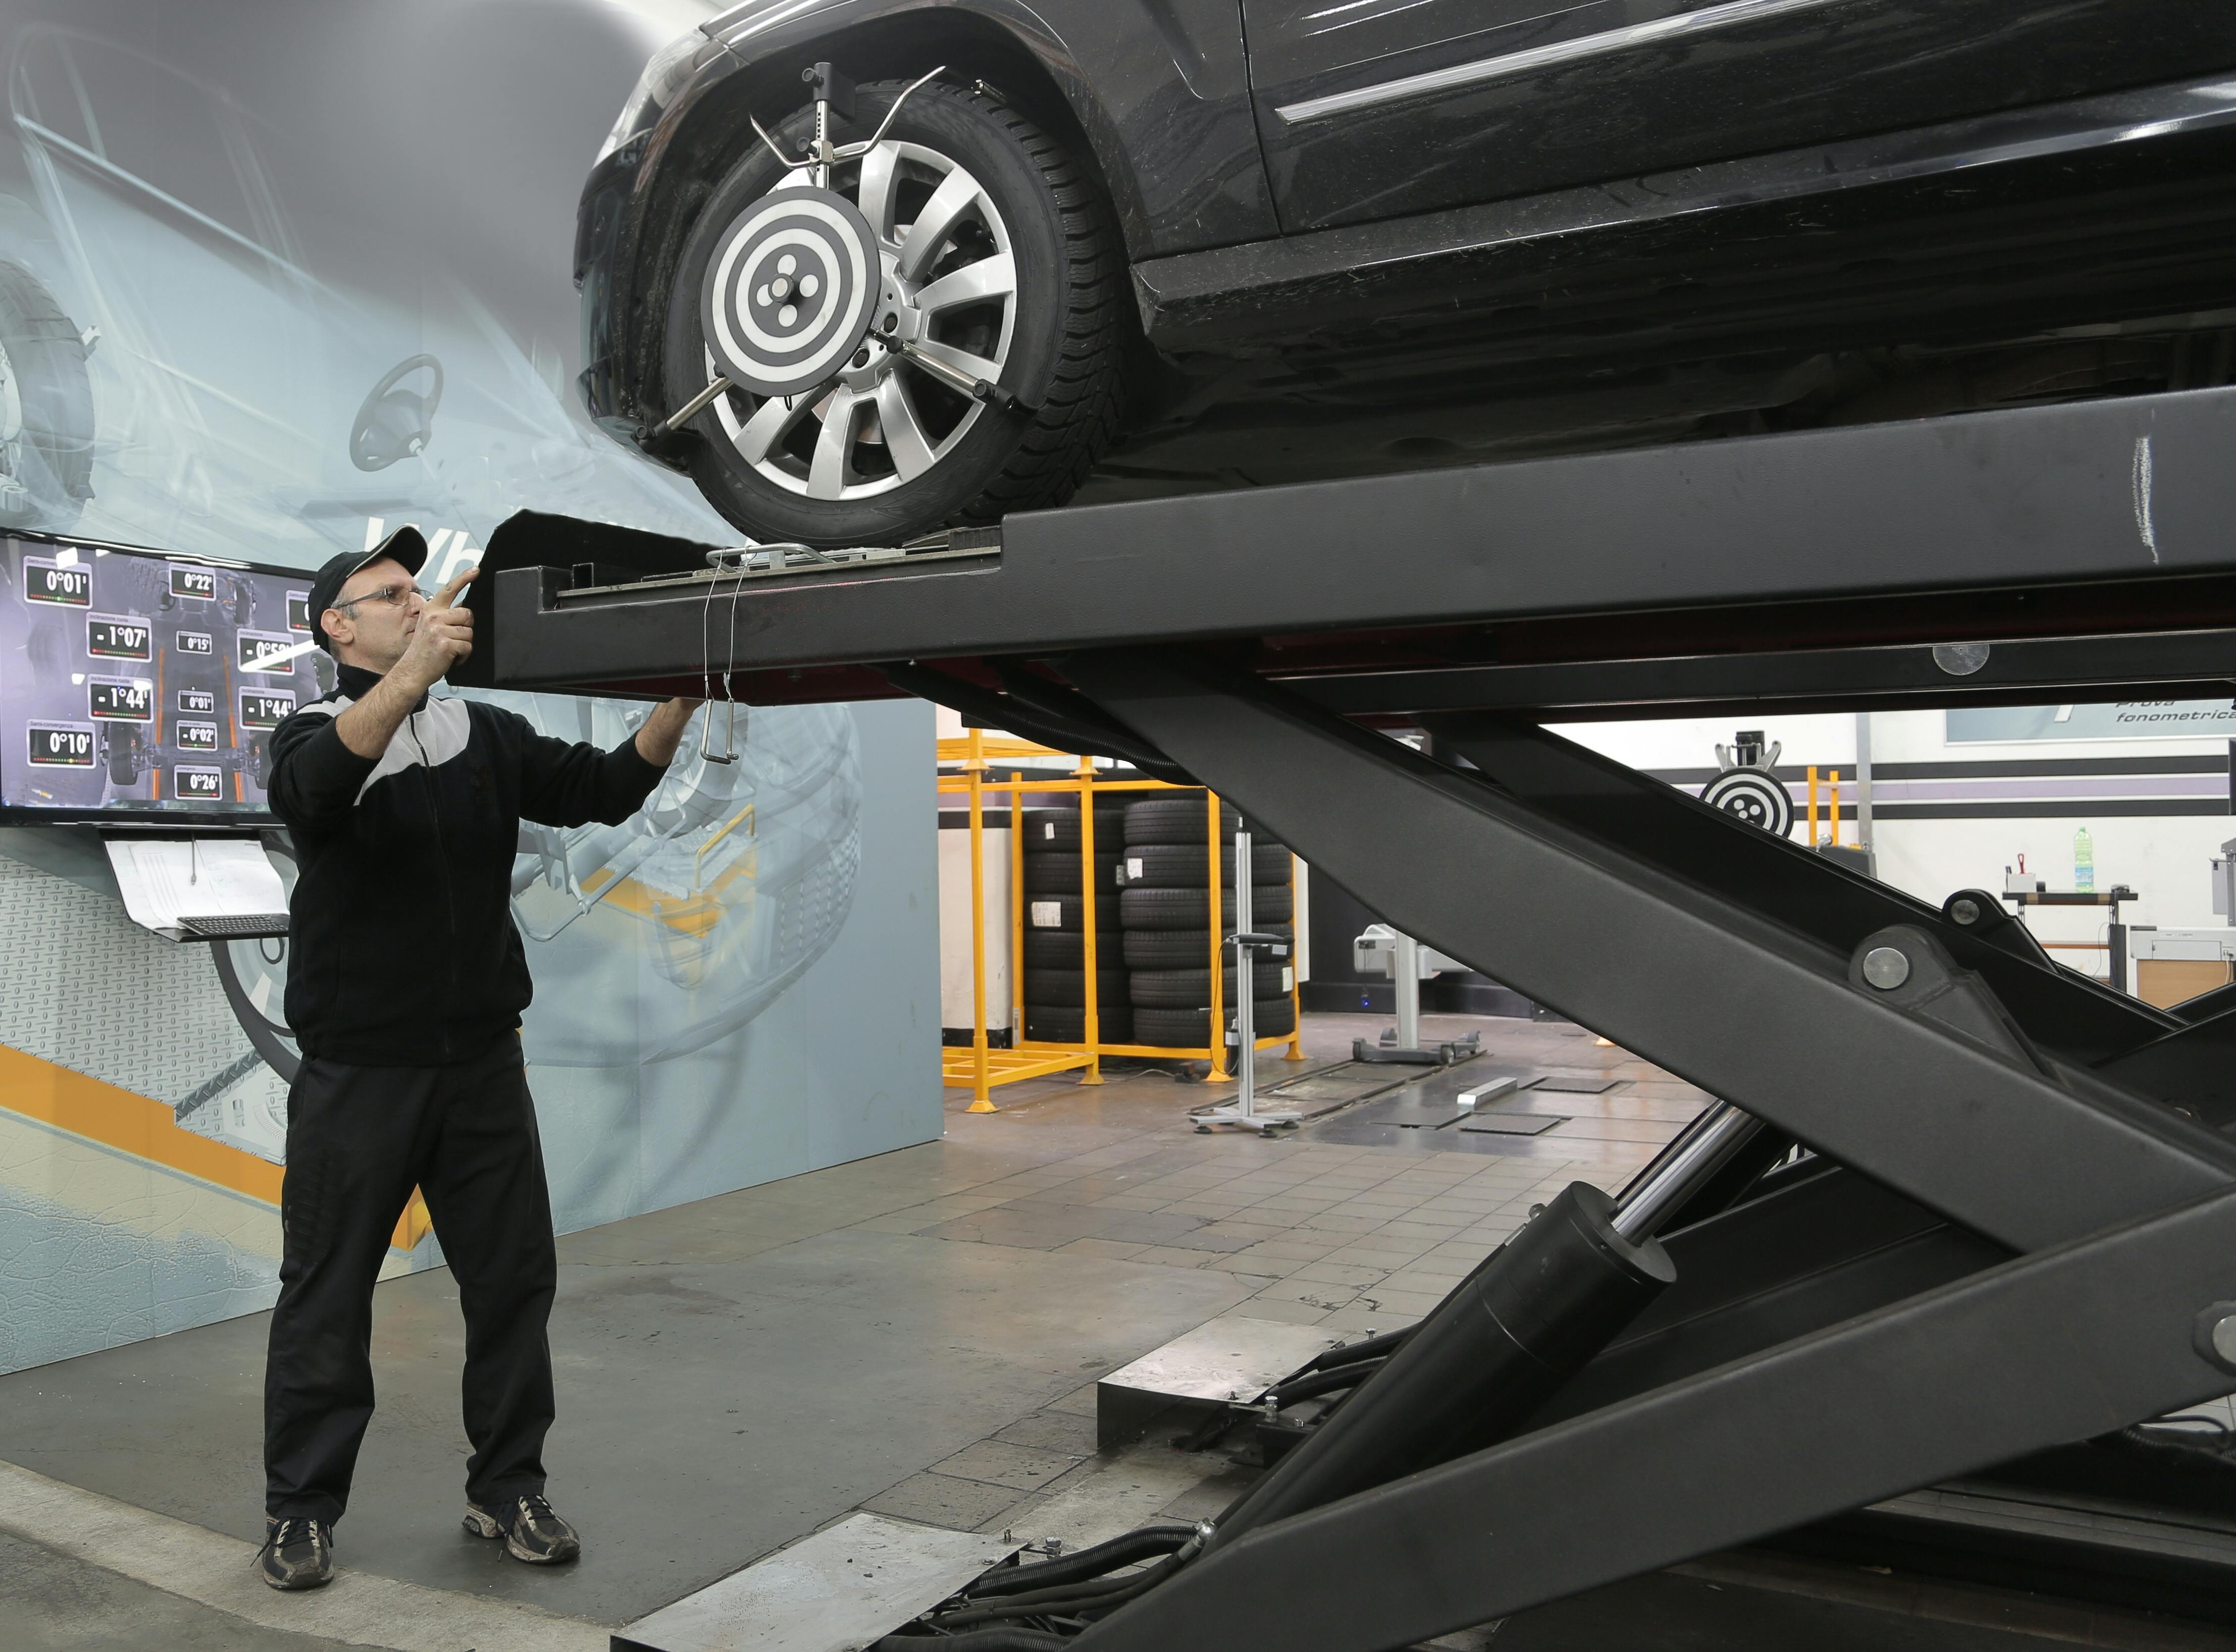 Serious mechanic checking car wheels on lift in modern car service